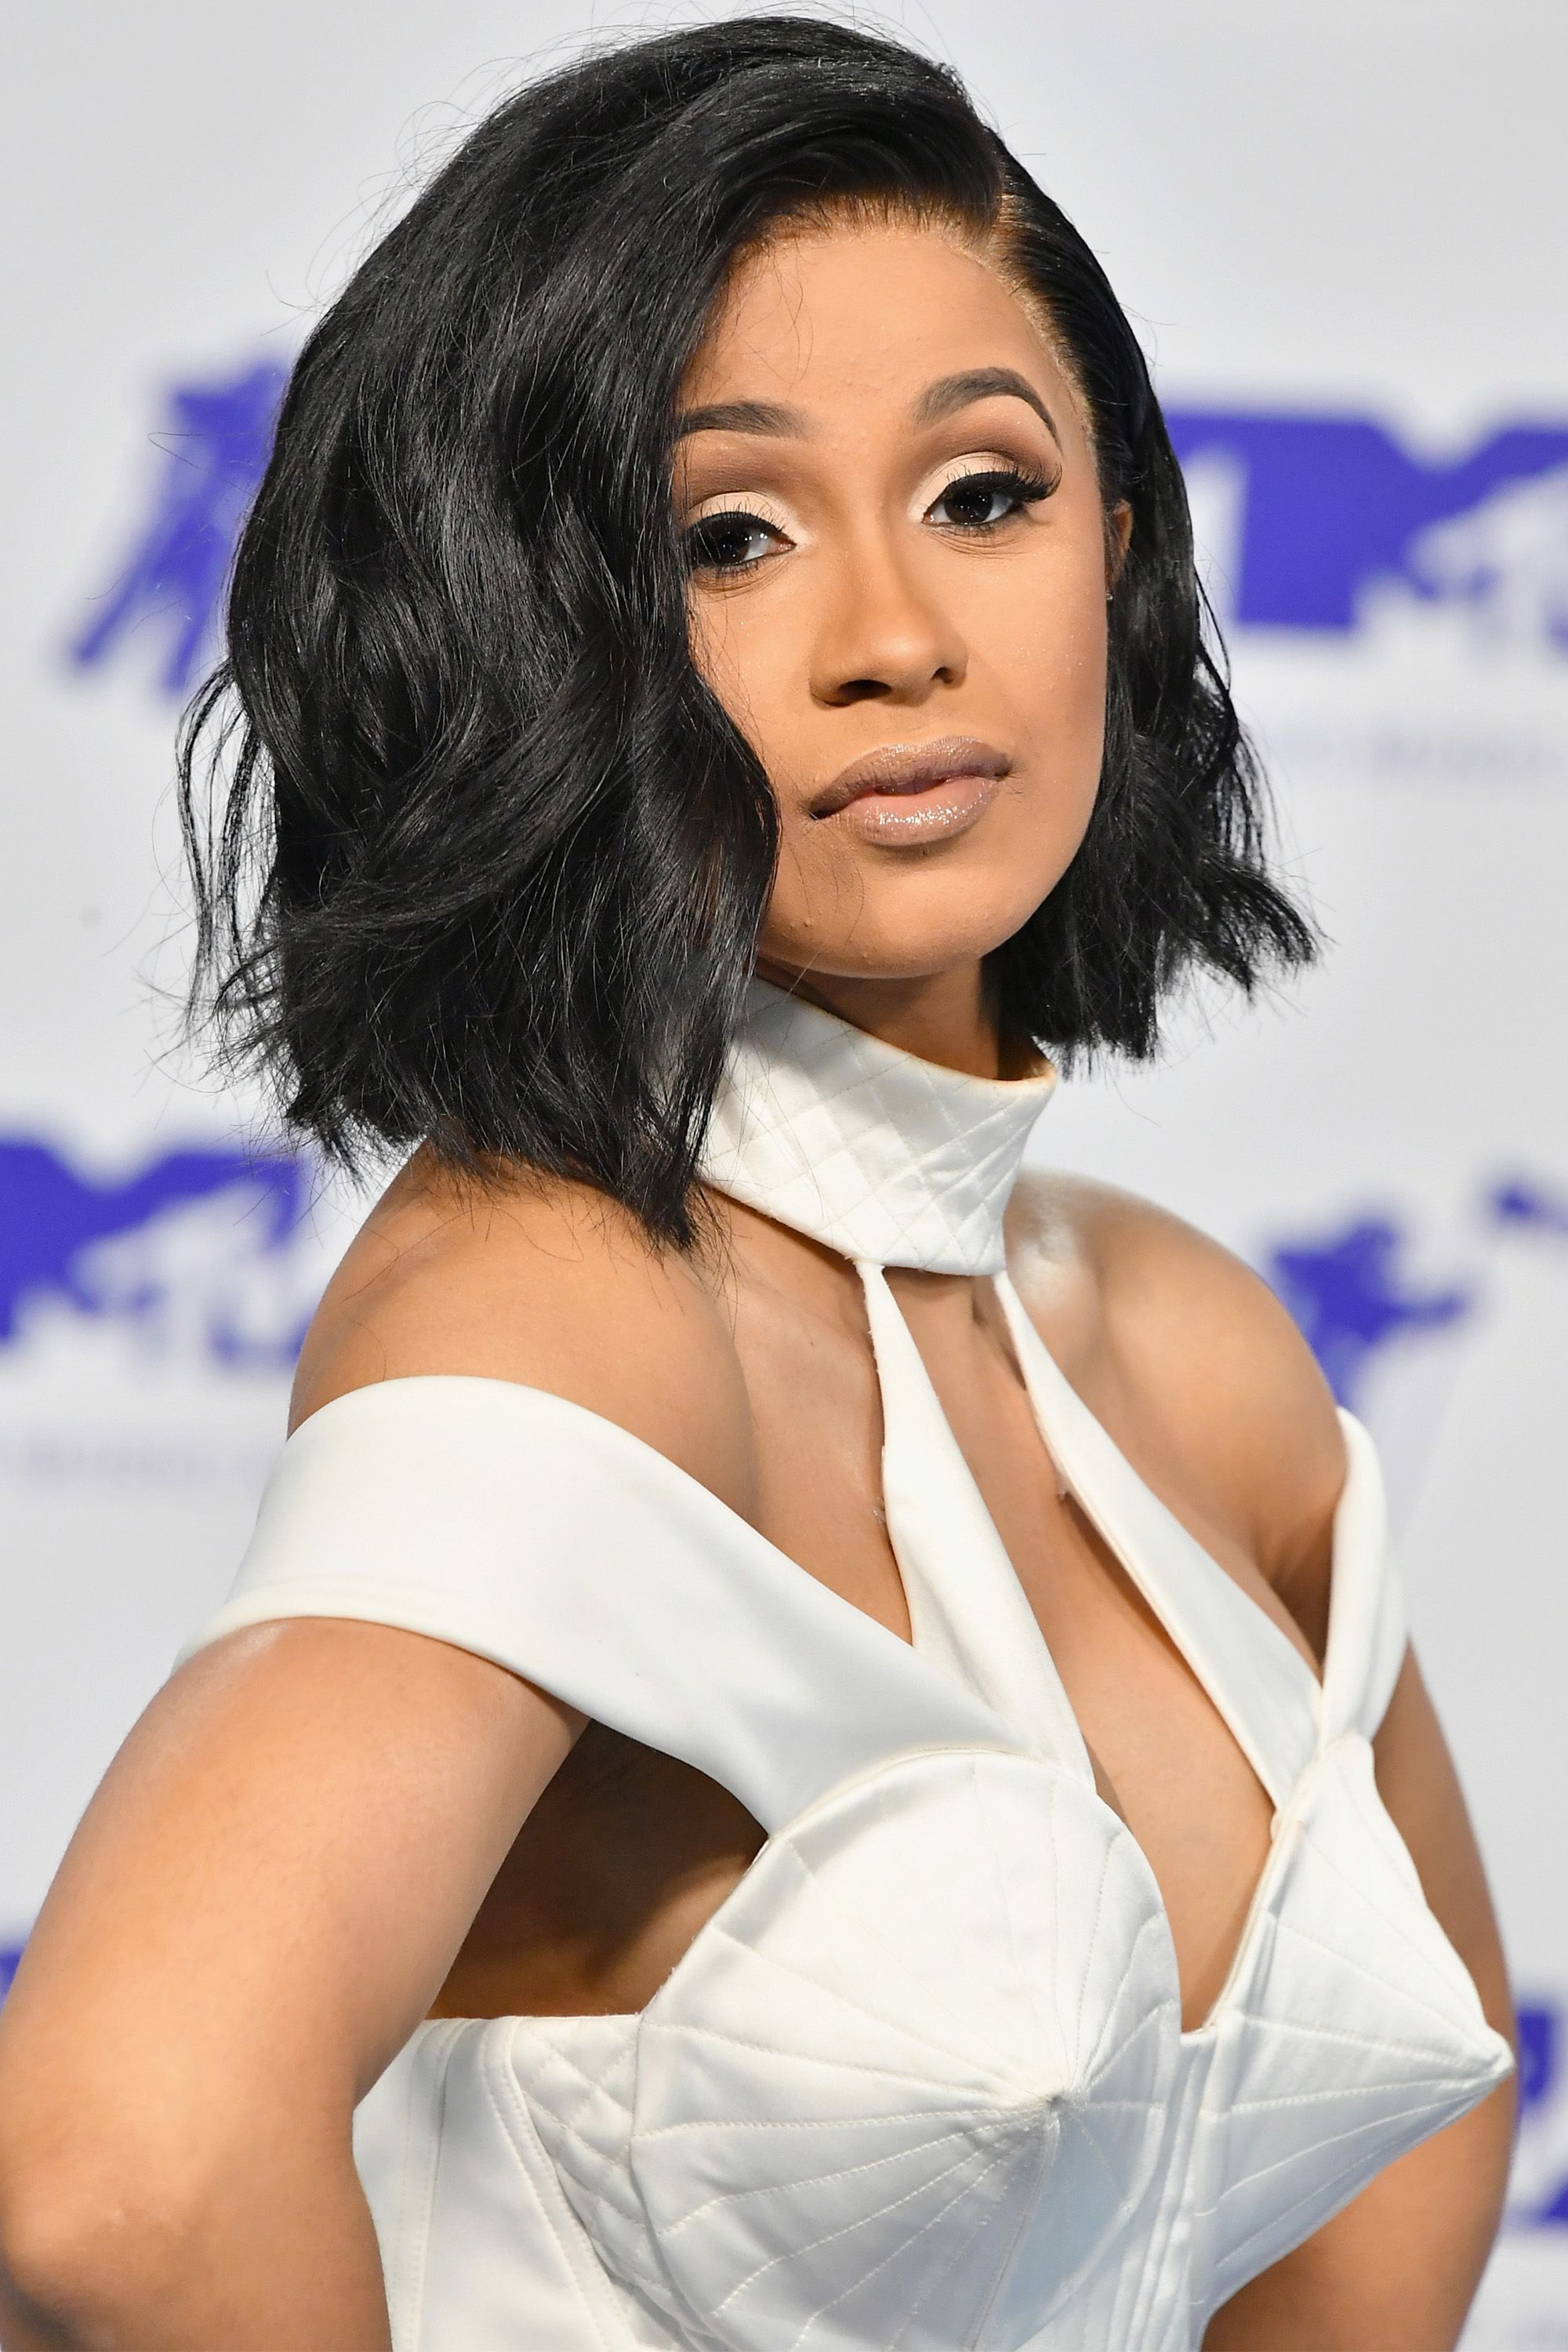 Hispanic Hip Hop Models Nude - Cardi B Facts - 45 Things You Didn't Know About Cardi B